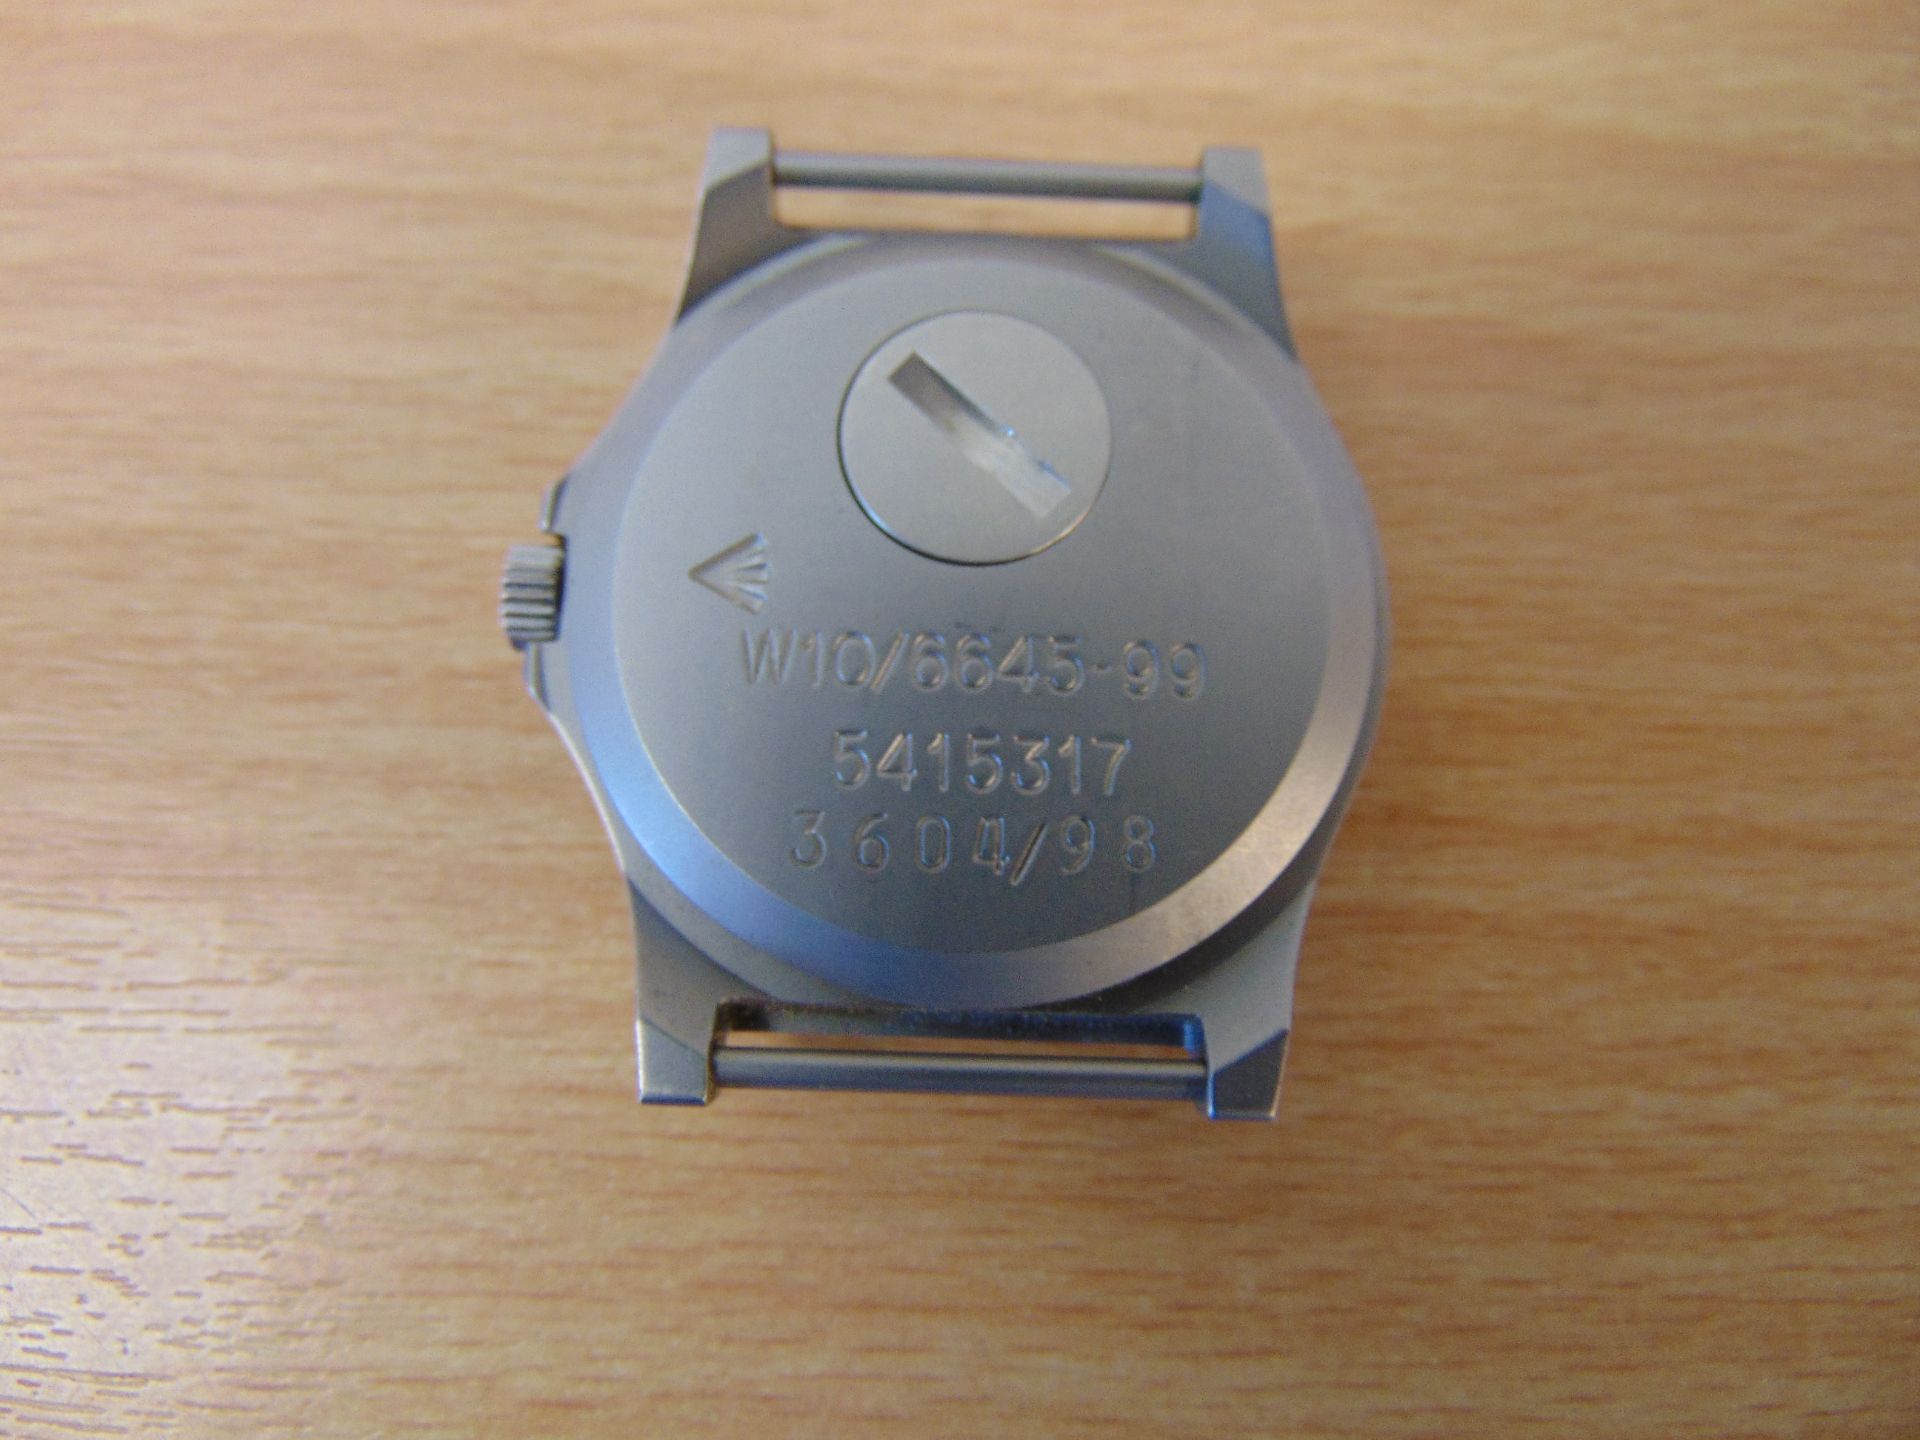 V Nice CWC W10 British Army Service Watch Nato Marks Date 1998, New Battery / Strap - Image 2 of 3